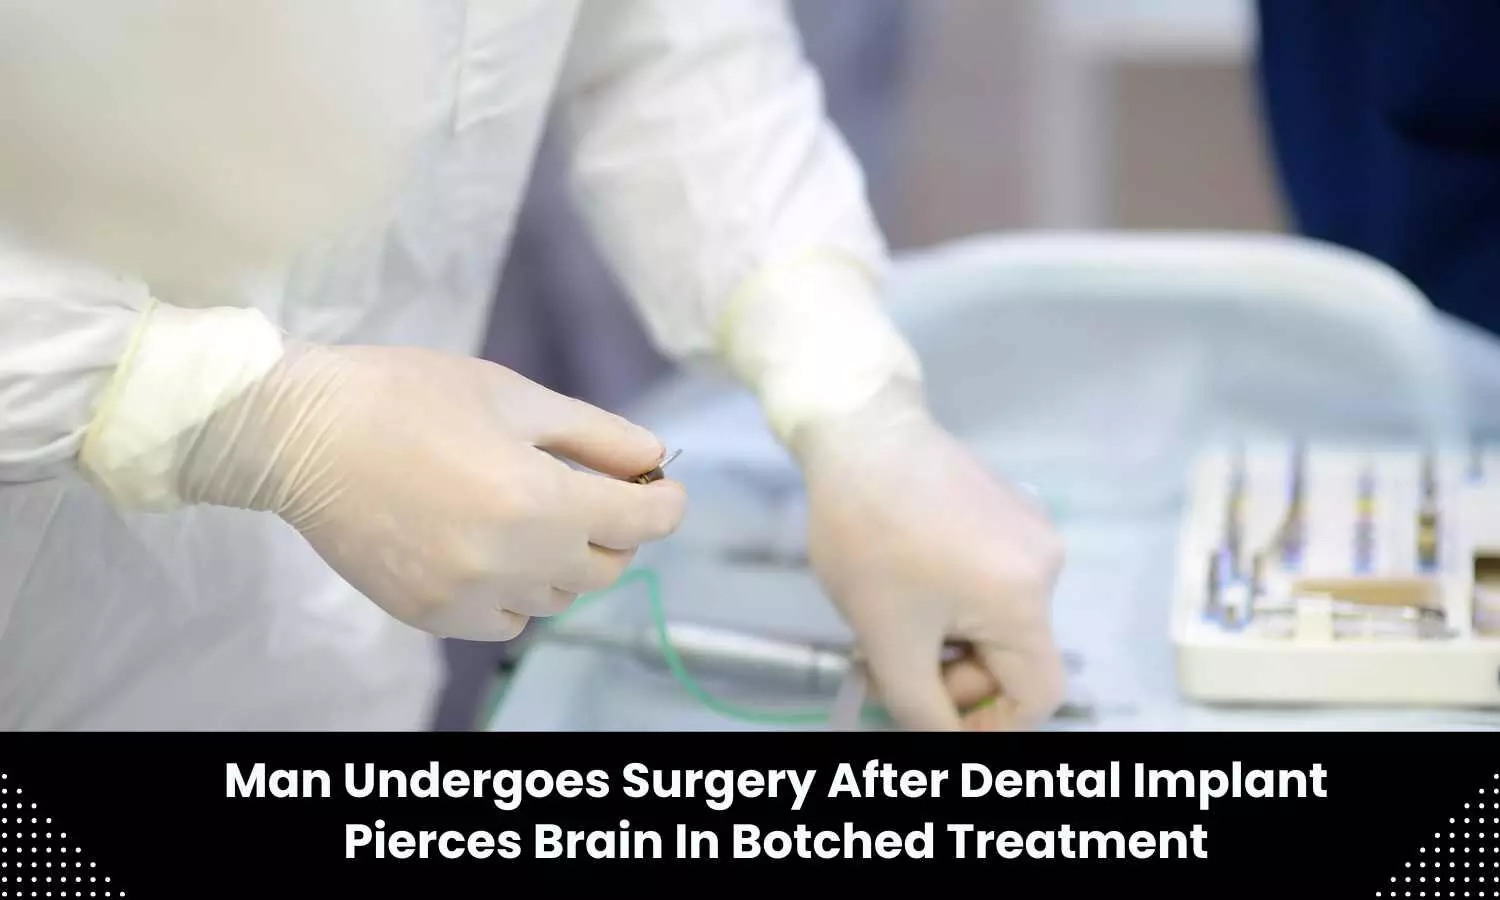 Man undergoes surgery after dental implant pierces brain in botched treatment